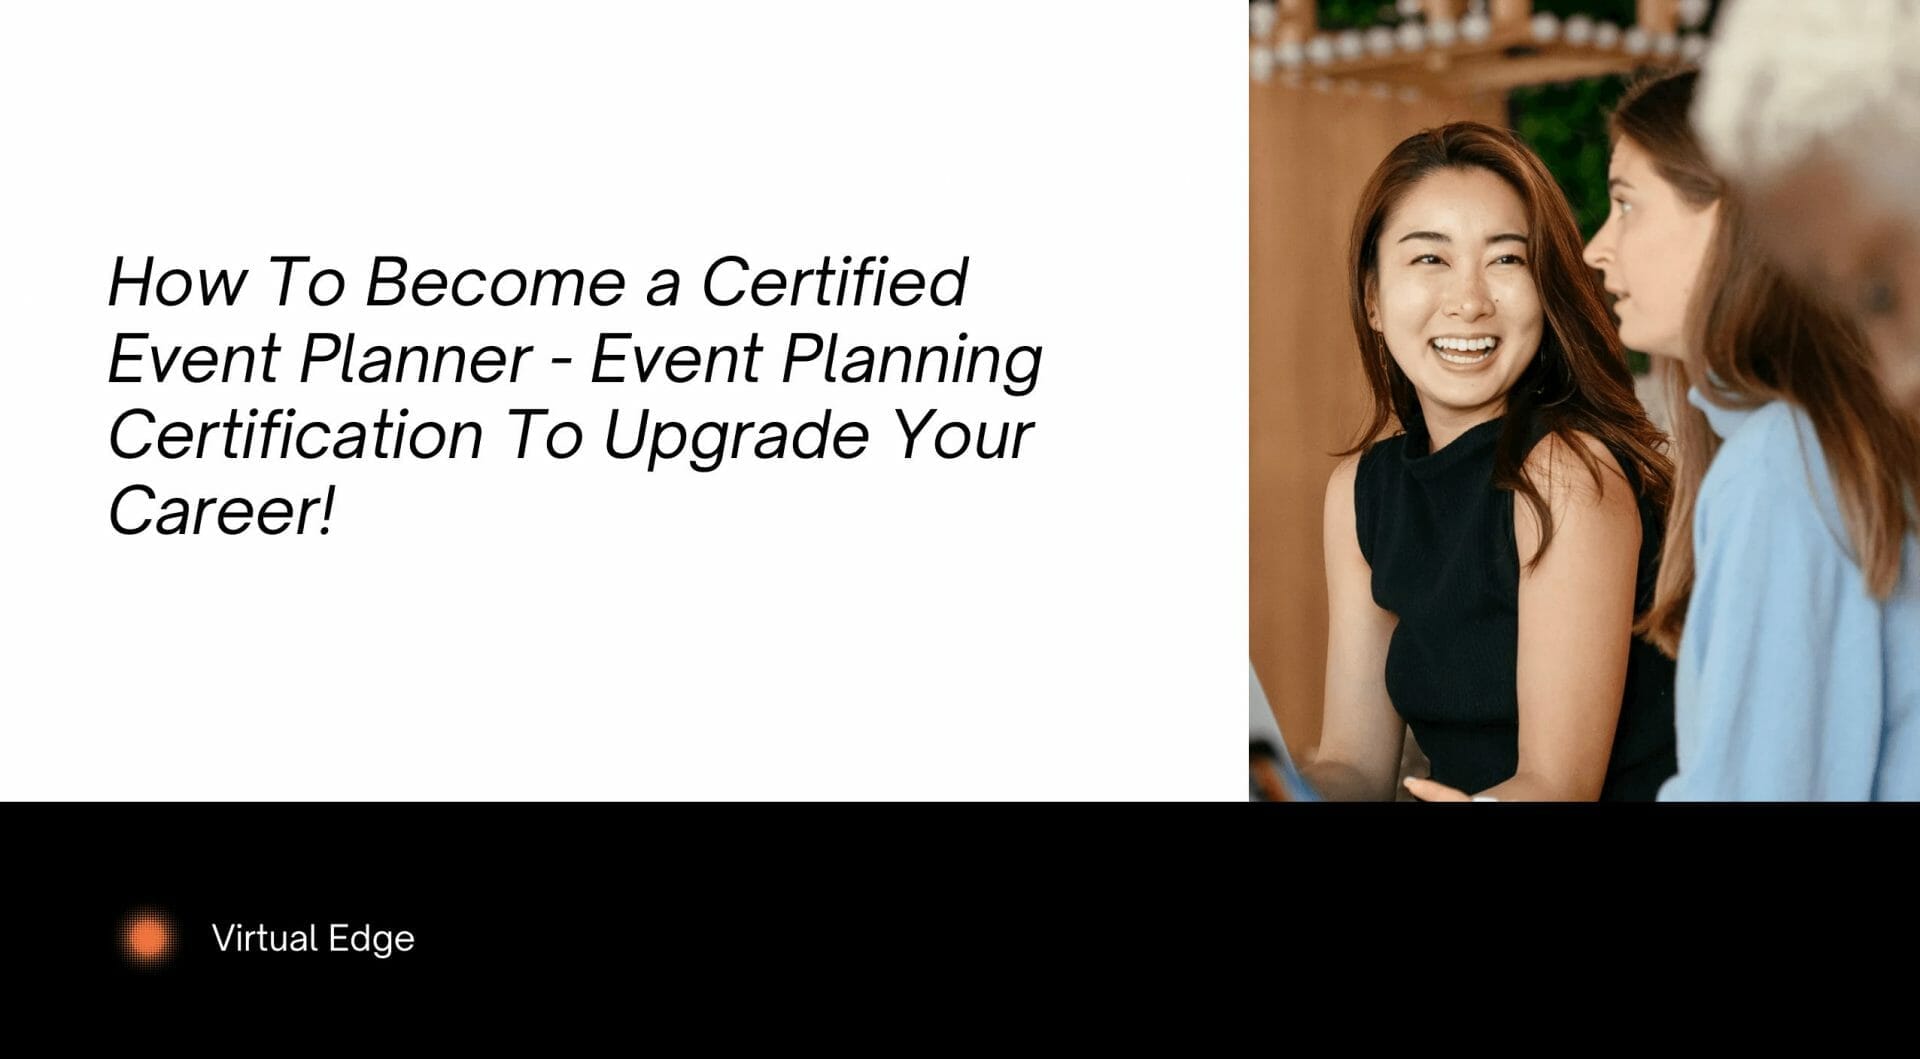 How To Become a Certified Event Planner - Event Planning Certification To Upgrade Your Career!